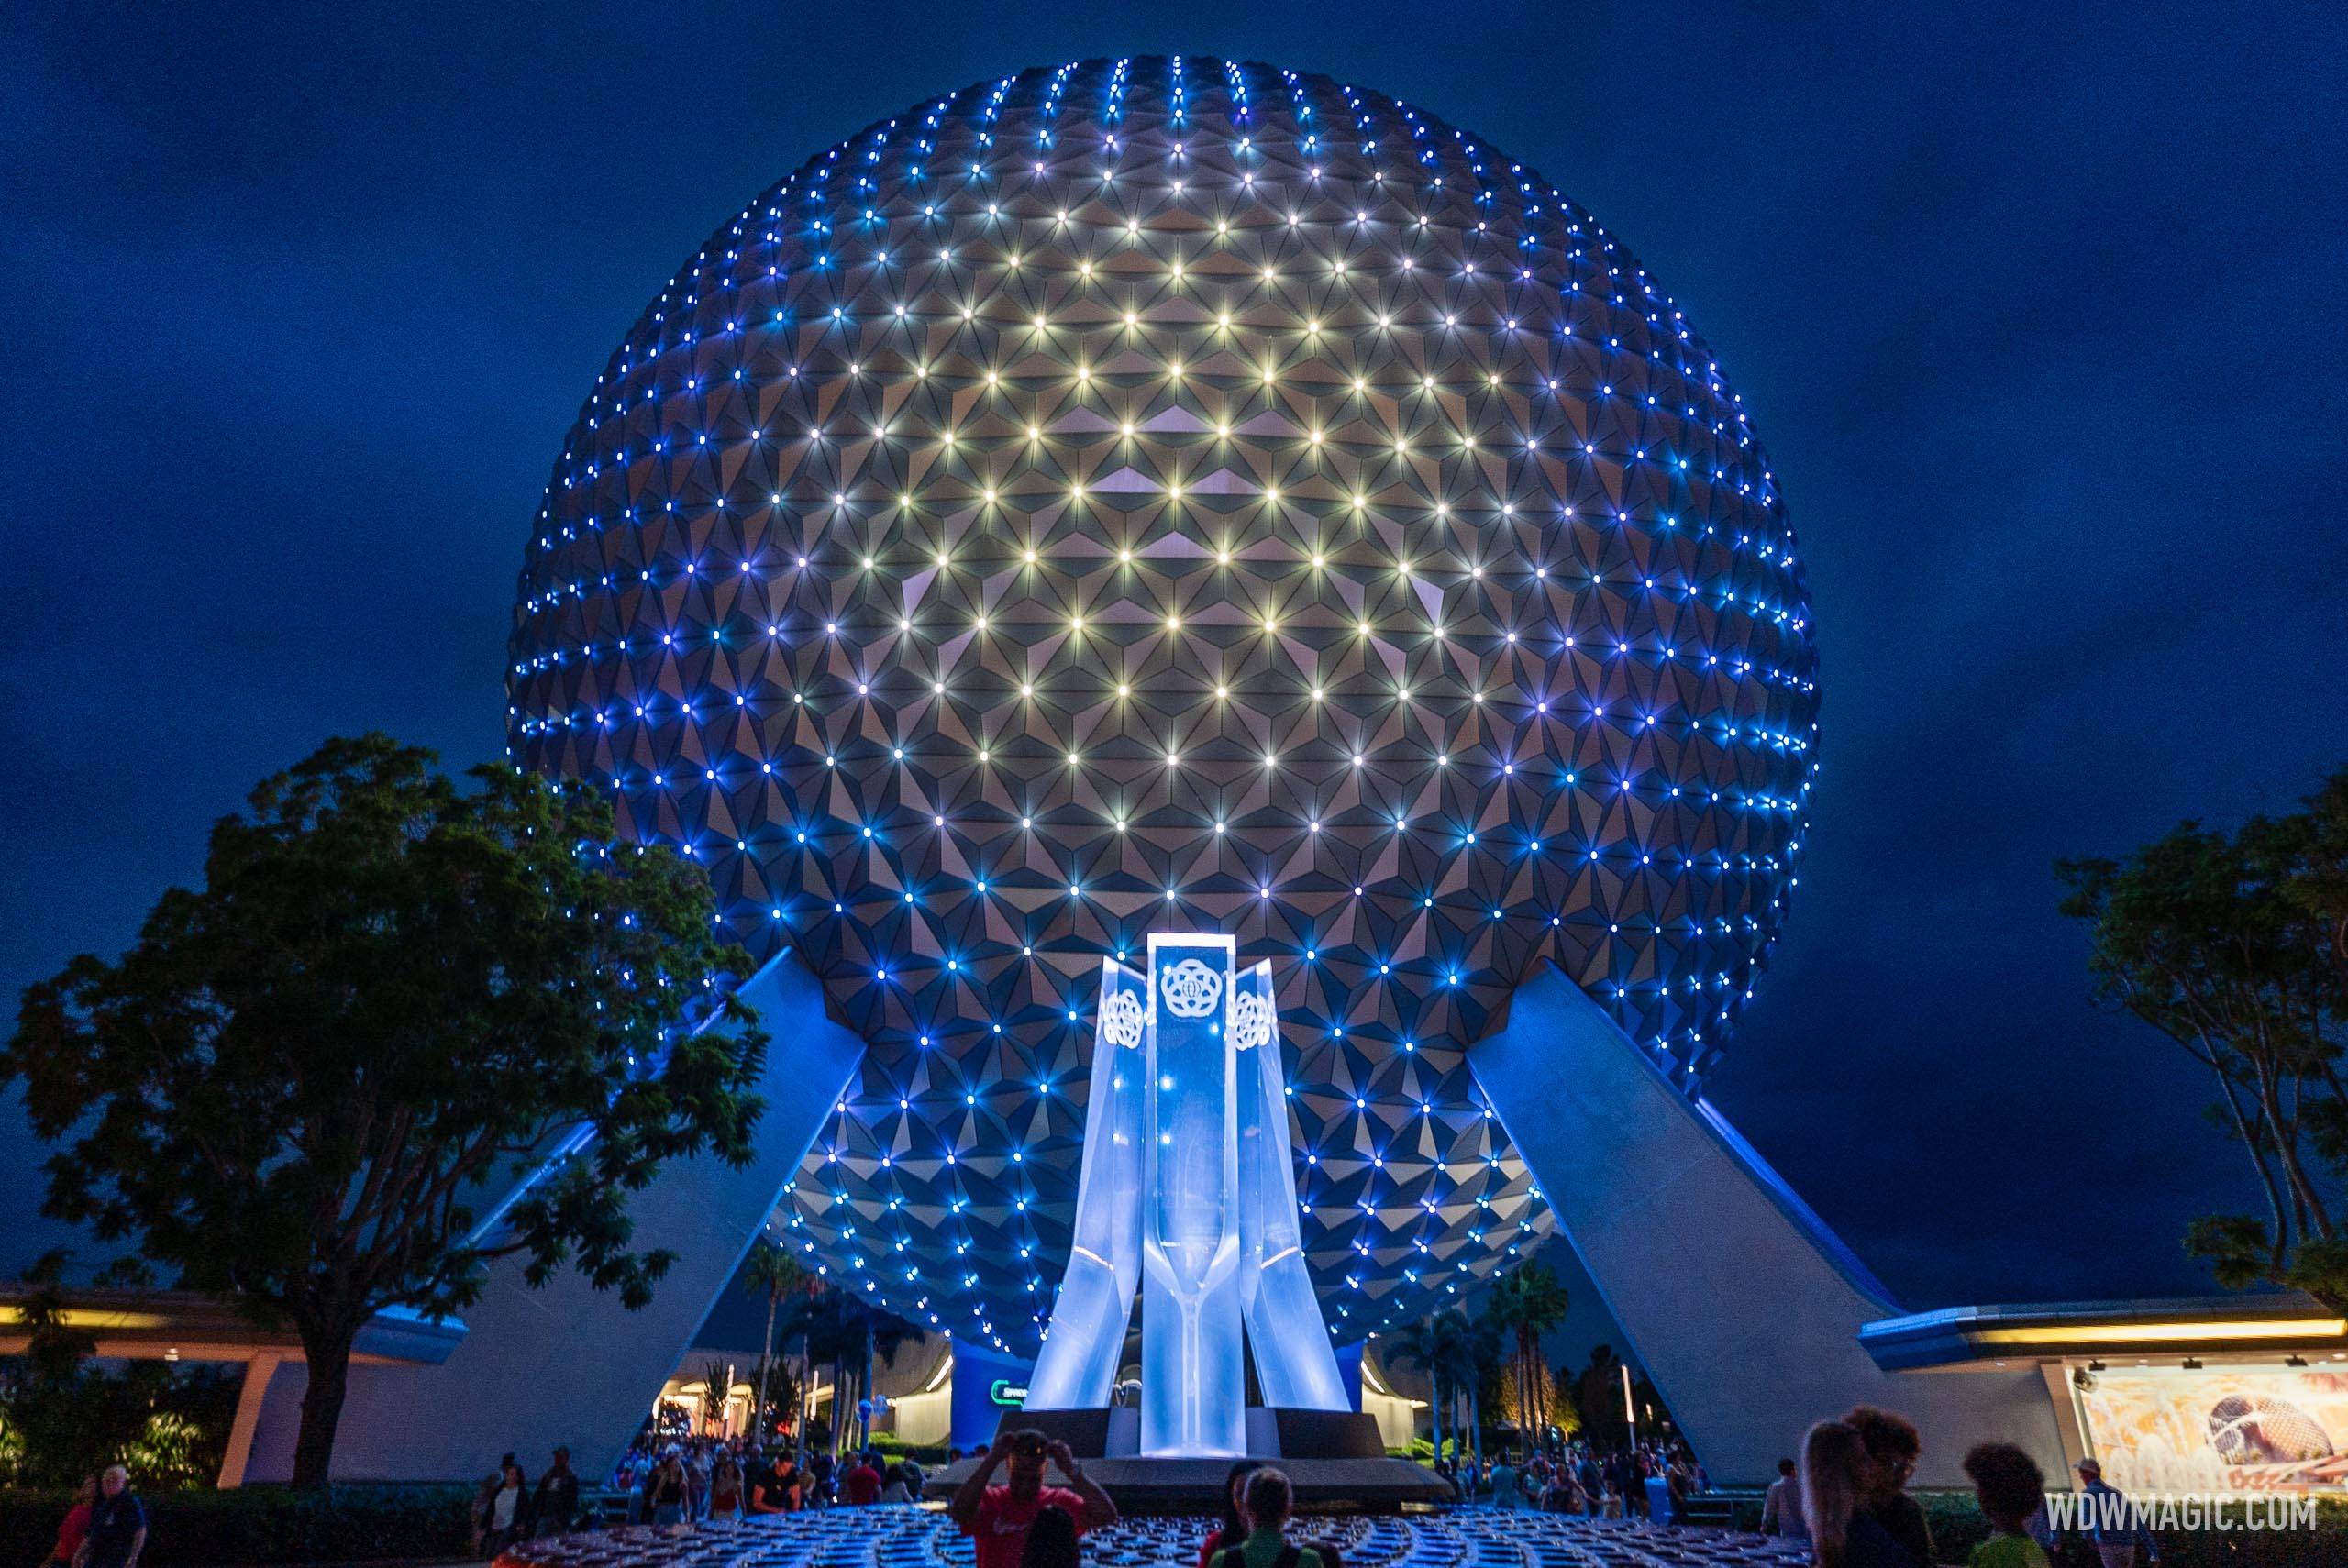 EPCOT's Spaceship Earth shines in new colors to celebrate 'Wish' movie opening, featuring 'I'm a Star' song